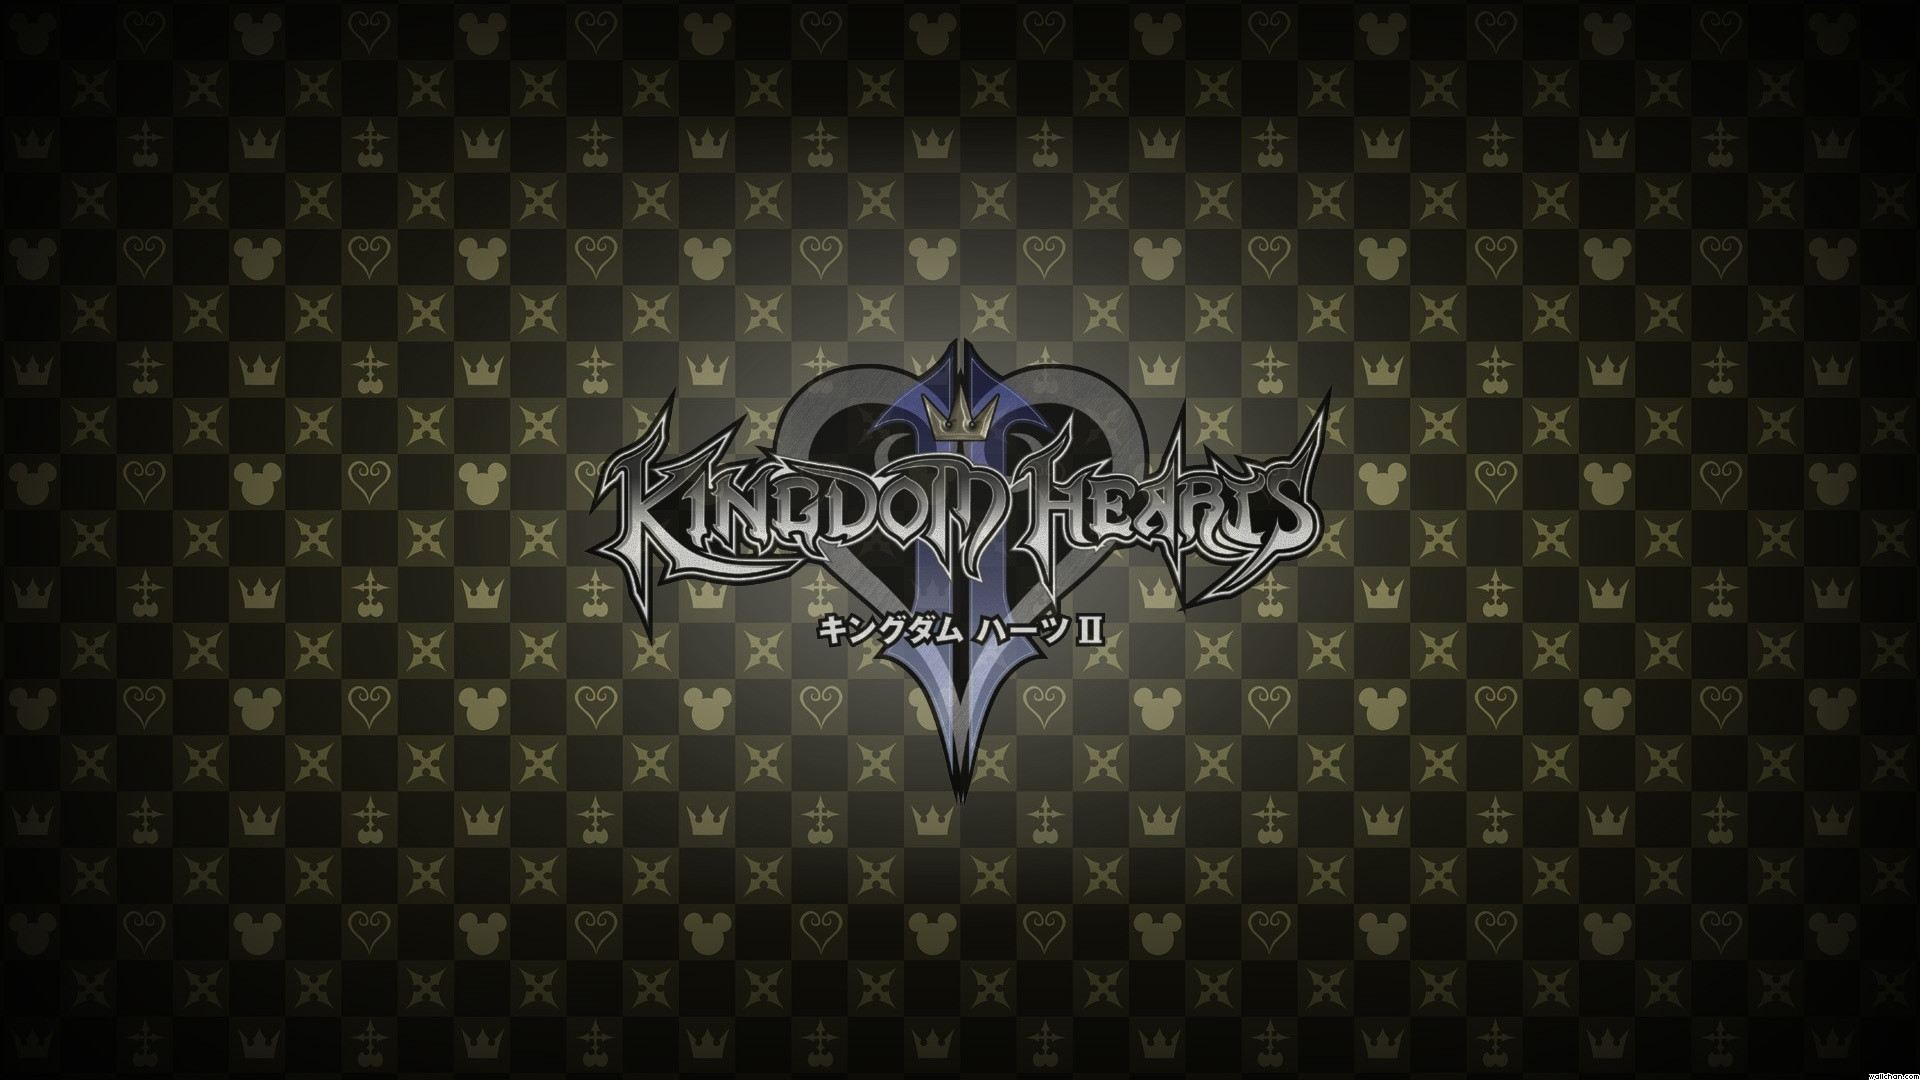 1920x1080 Here is a collection of Kingdom Hearts wallpapers that I compiled. Feel  free to use them as your own wallpapers. - Album on Imgur